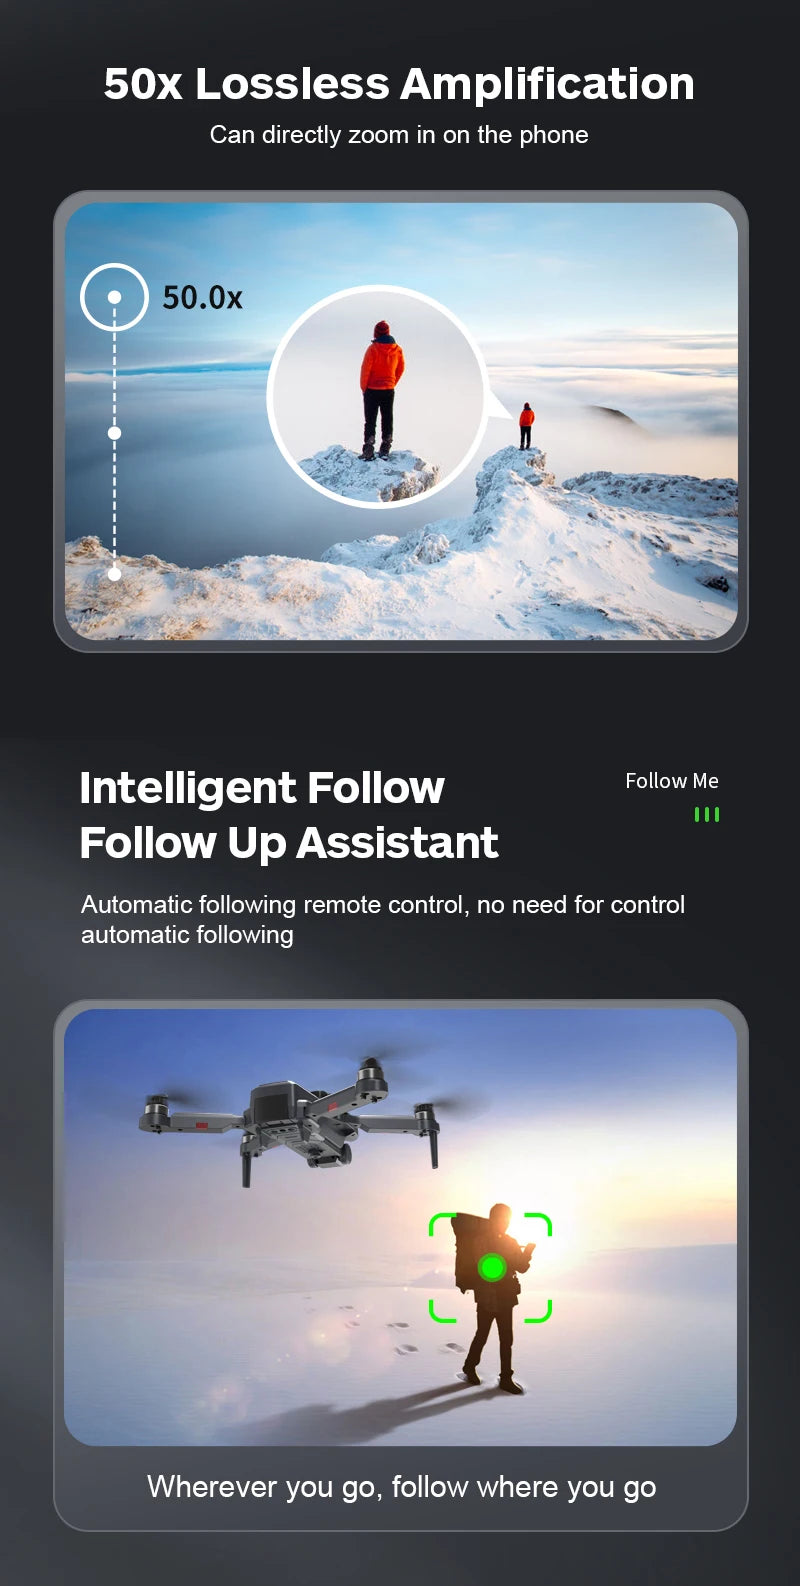 S118 Drone, s0x intelligent follow follow follow me follow up assistant can directly